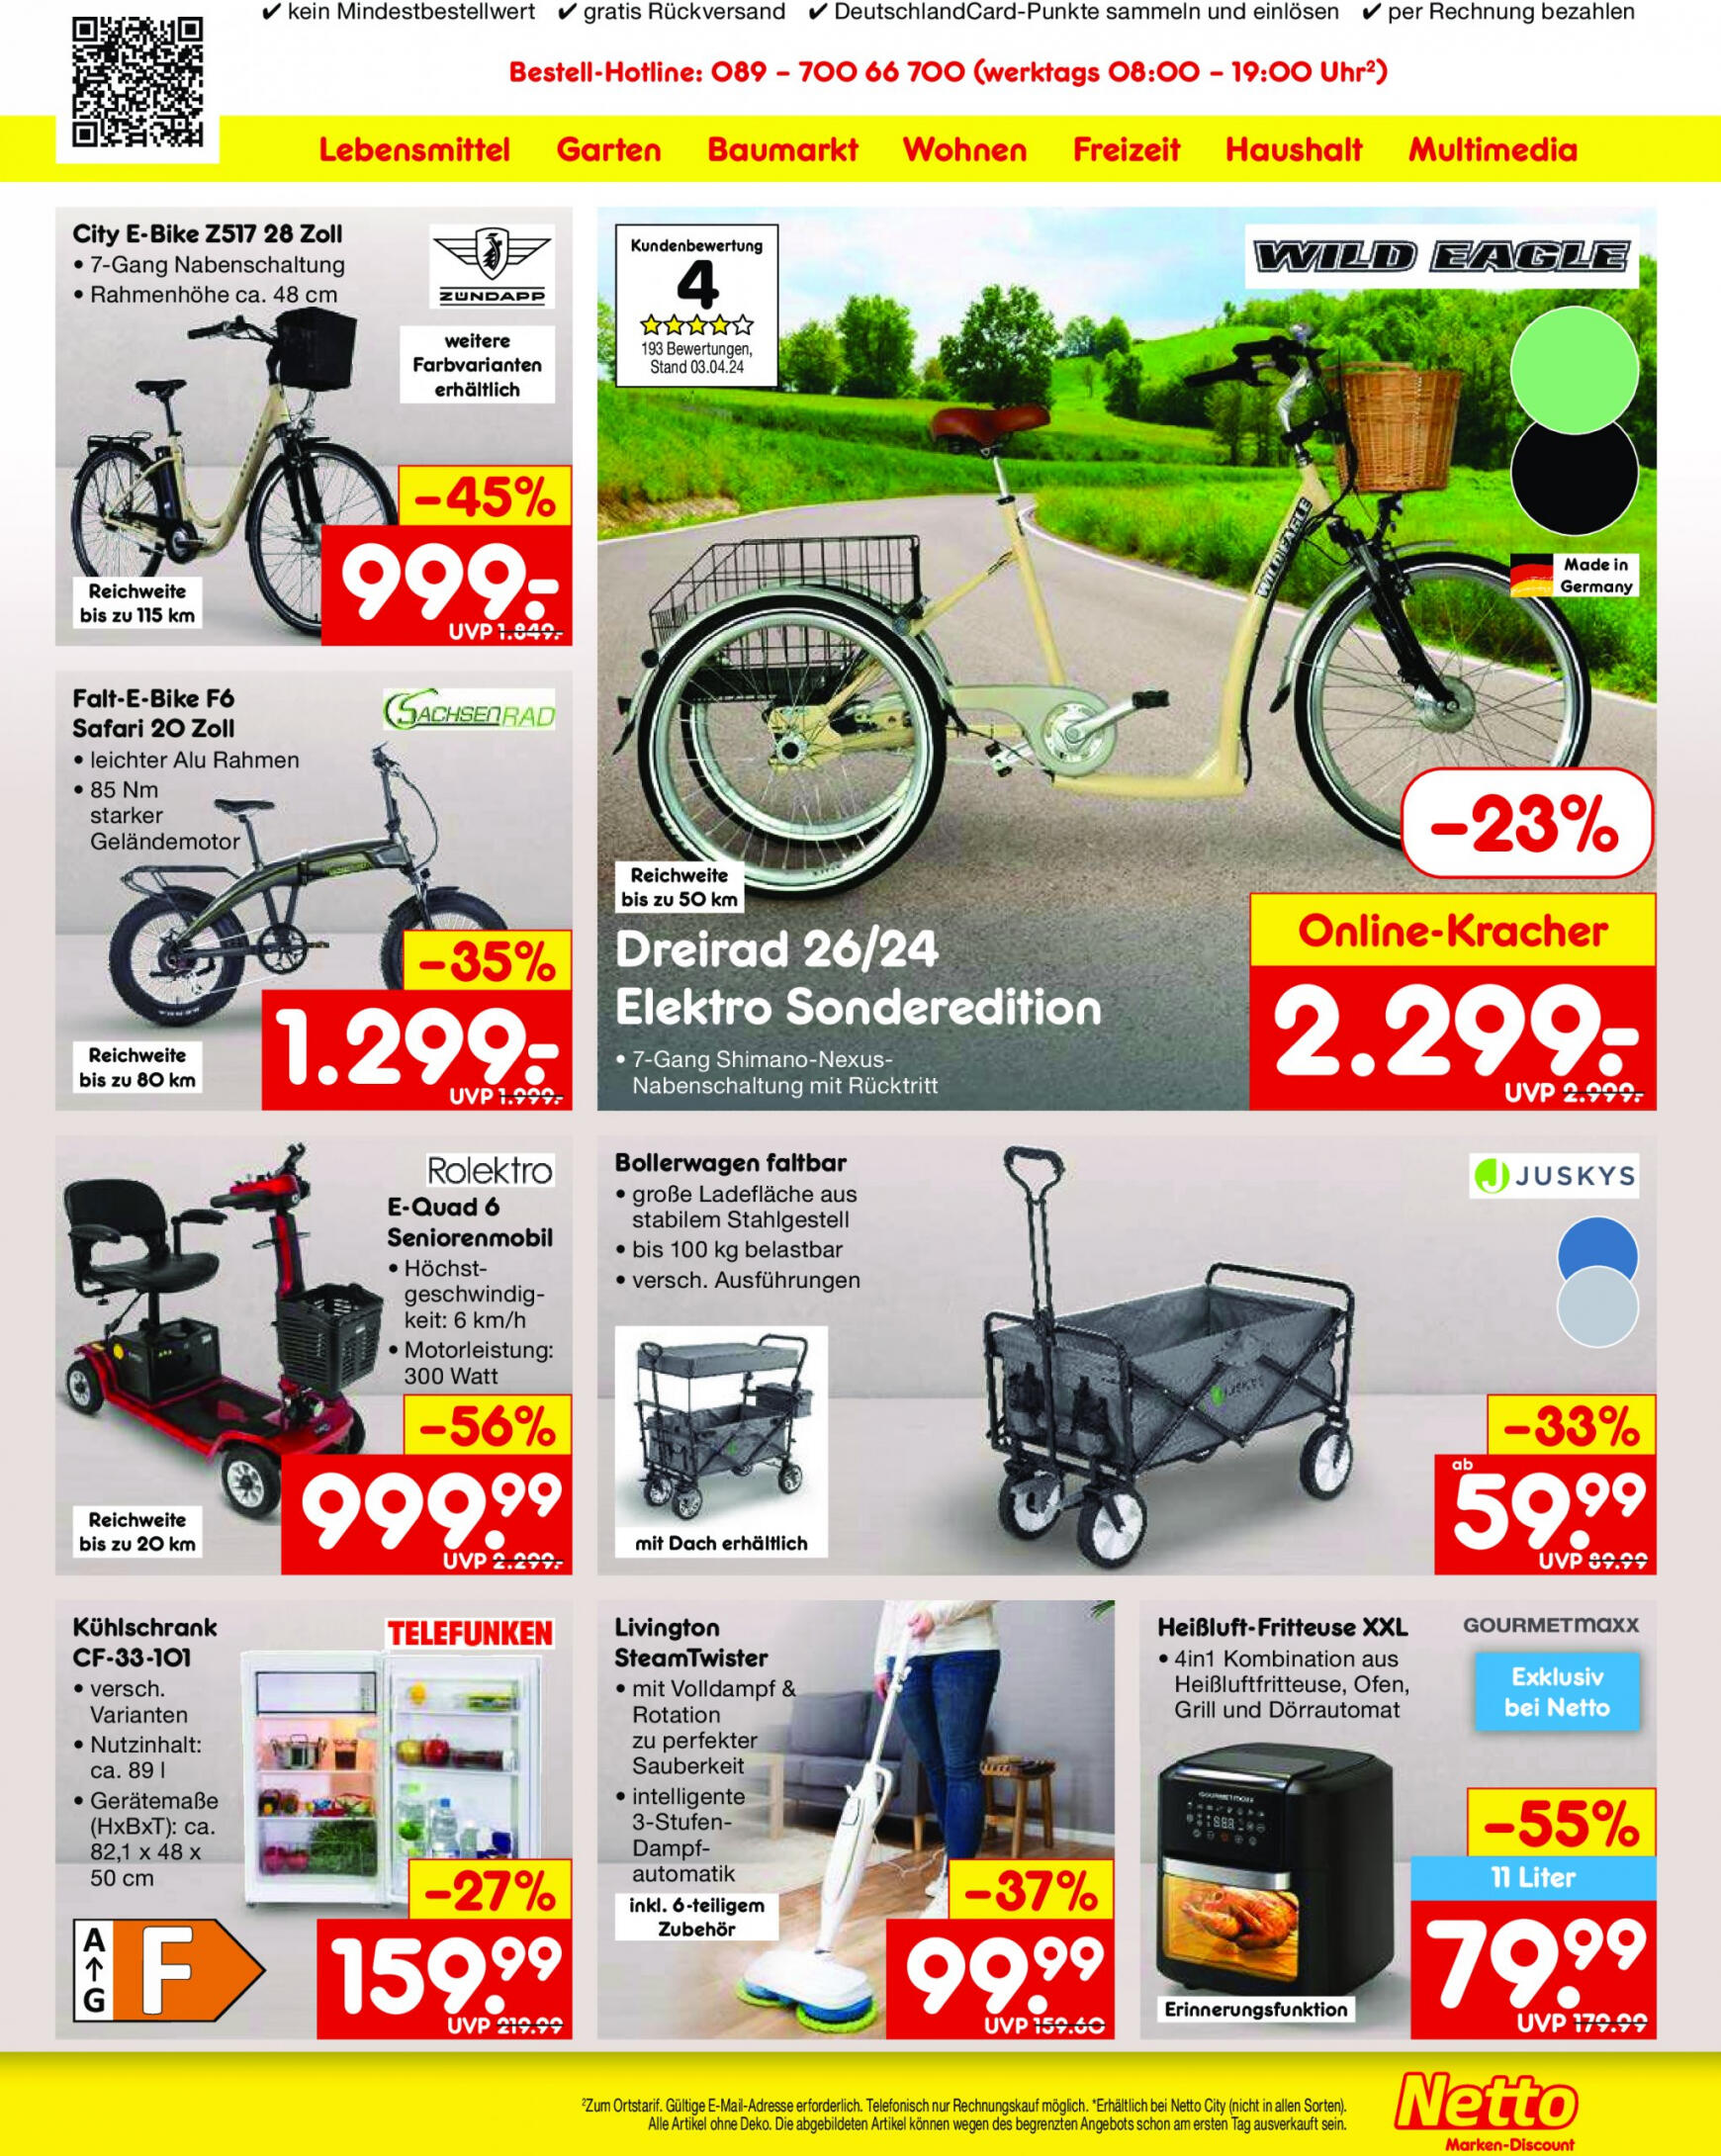 netto - Flyer Netto aktuell 06.05. - 11.05. - page: 37